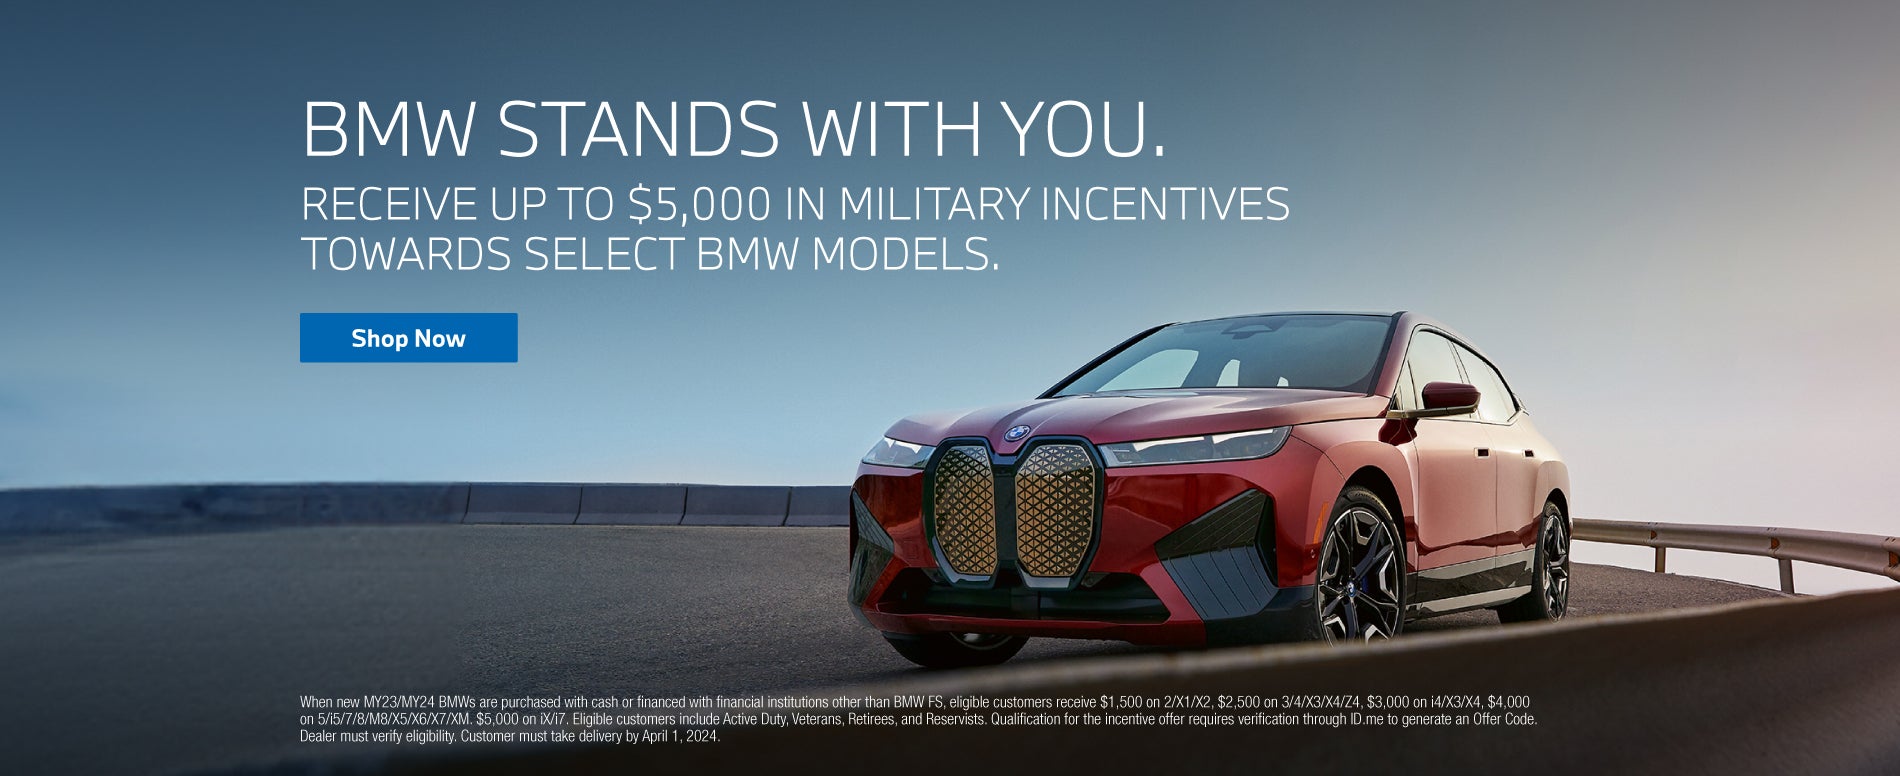 BMW Stands With You